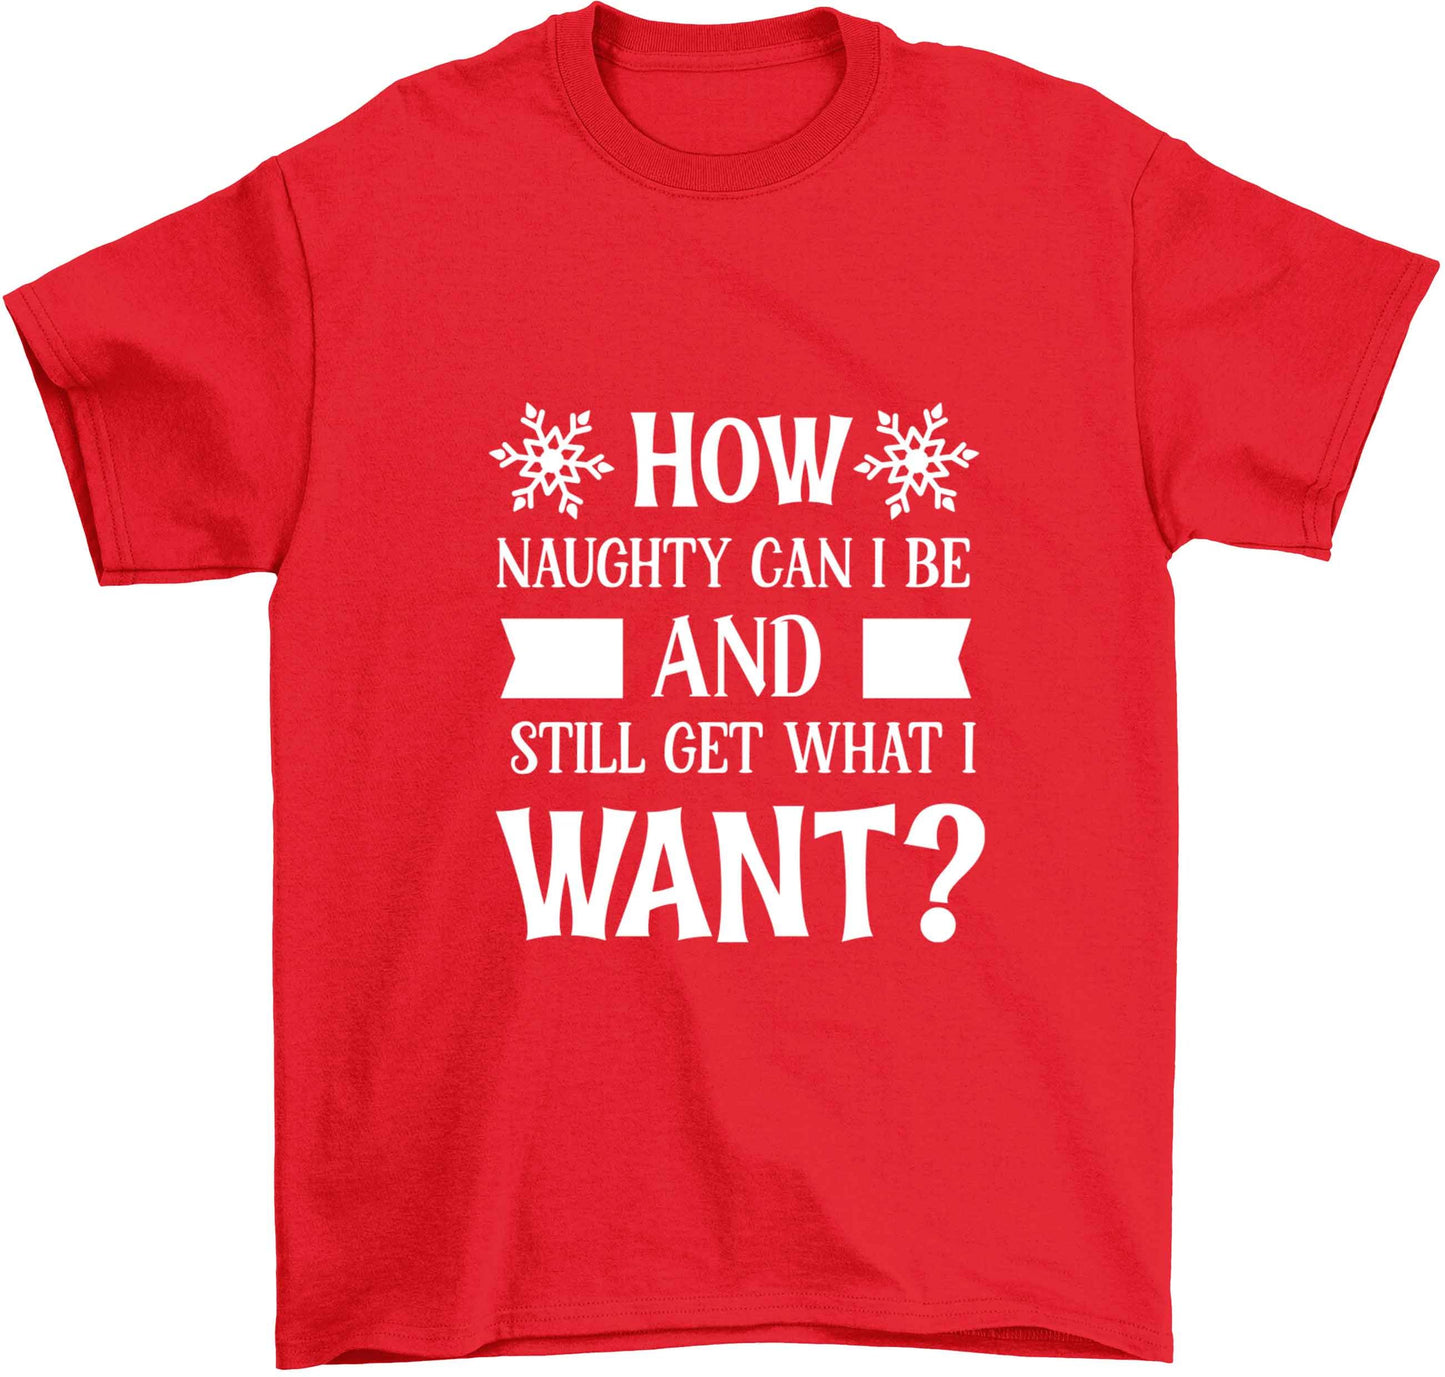 How naughty can I be and still get what I want? Children's red Tshirt 12-13 Years